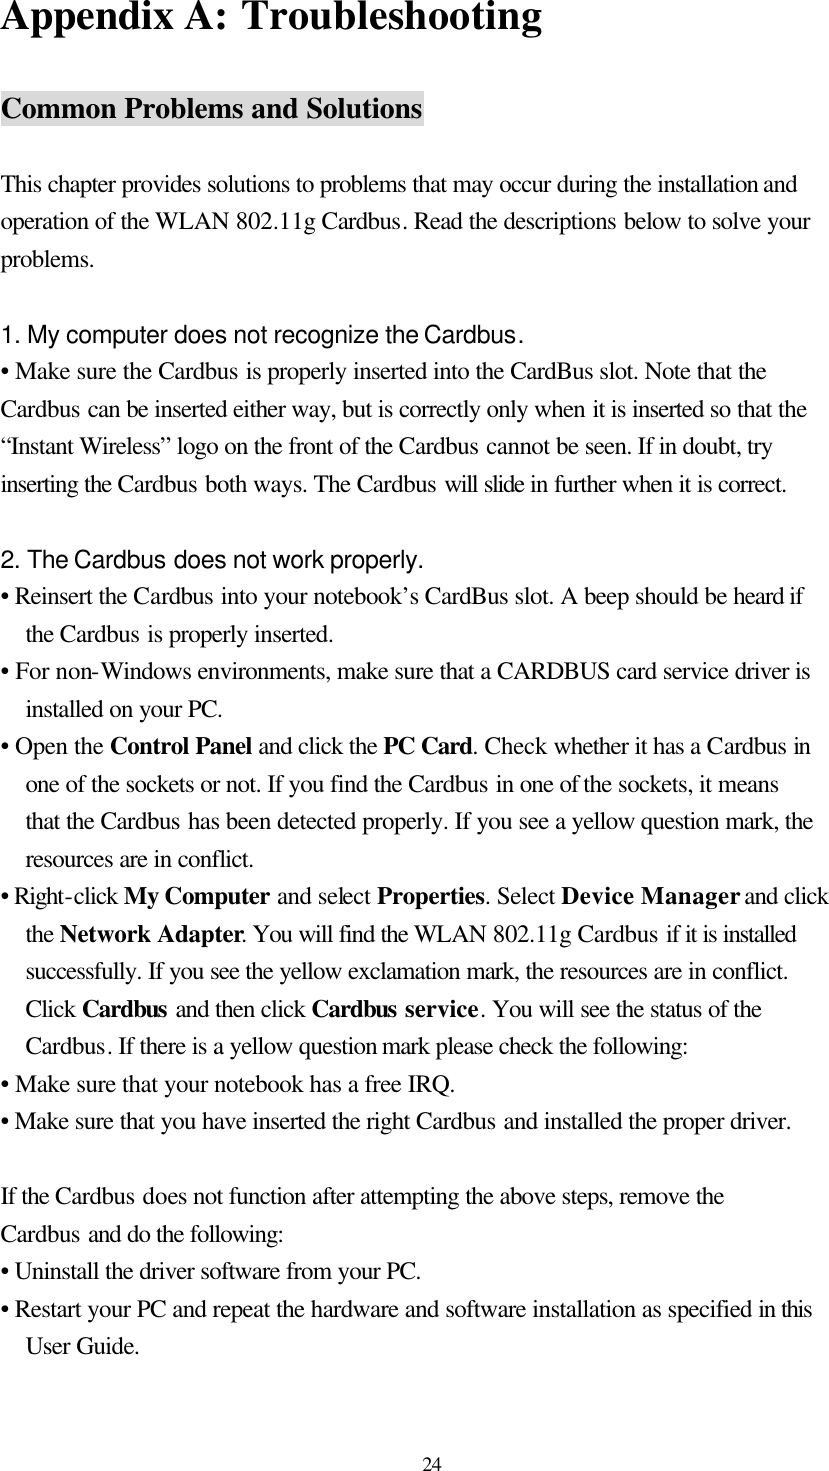  24 Appendix A: Troubleshooting  Common Problems and Solutions  This chapter provides solutions to problems that may occur during the installation and operation of the WLAN 802.11g Cardbus. Read the descriptions below to solve your problems.  1. My computer does not recognize the Cardbus. • Make sure the Cardbus is properly inserted into the CardBus slot. Note that the Cardbus can be inserted either way, but is correctly only when it is inserted so that the “Instant Wireless” logo on the front of the Cardbus cannot be seen. If in doubt, try inserting the Cardbus both ways. The Cardbus will slide in further when it is correct.  2. The Cardbus does not work properly. • Reinsert the Cardbus into your notebook’s CardBus slot. A beep should be heard if the Cardbus is properly inserted. • For non-Windows environments, make sure that a CARDBUS card service driver is installed on your PC. • Open the Control Panel and click the PC Card. Check whether it has a Cardbus in one of the sockets or not. If you find the Cardbus in one of the sockets, it means that the Cardbus has been detected properly. If you see a yellow question mark, the resources are in conflict. • Right-click My Computer and select Properties. Select Device Manager and click the Network Adapter. You will find the WLAN 802.11g Cardbus if it is installed successfully. If you see the yellow exclamation mark, the resources are in conflict. Click Cardbus and then click Cardbus service. You will see the status of the Cardbus. If there is a yellow question mark please check the following: • Make sure that your notebook has a free IRQ. • Make sure that you have inserted the right Cardbus and installed the proper driver.  If the Cardbus does not function after attempting the above steps, remove the Cardbus and do the following: • Uninstall the driver software from your PC. • Restart your PC and repeat the hardware and software installation as specified in this User Guide. 